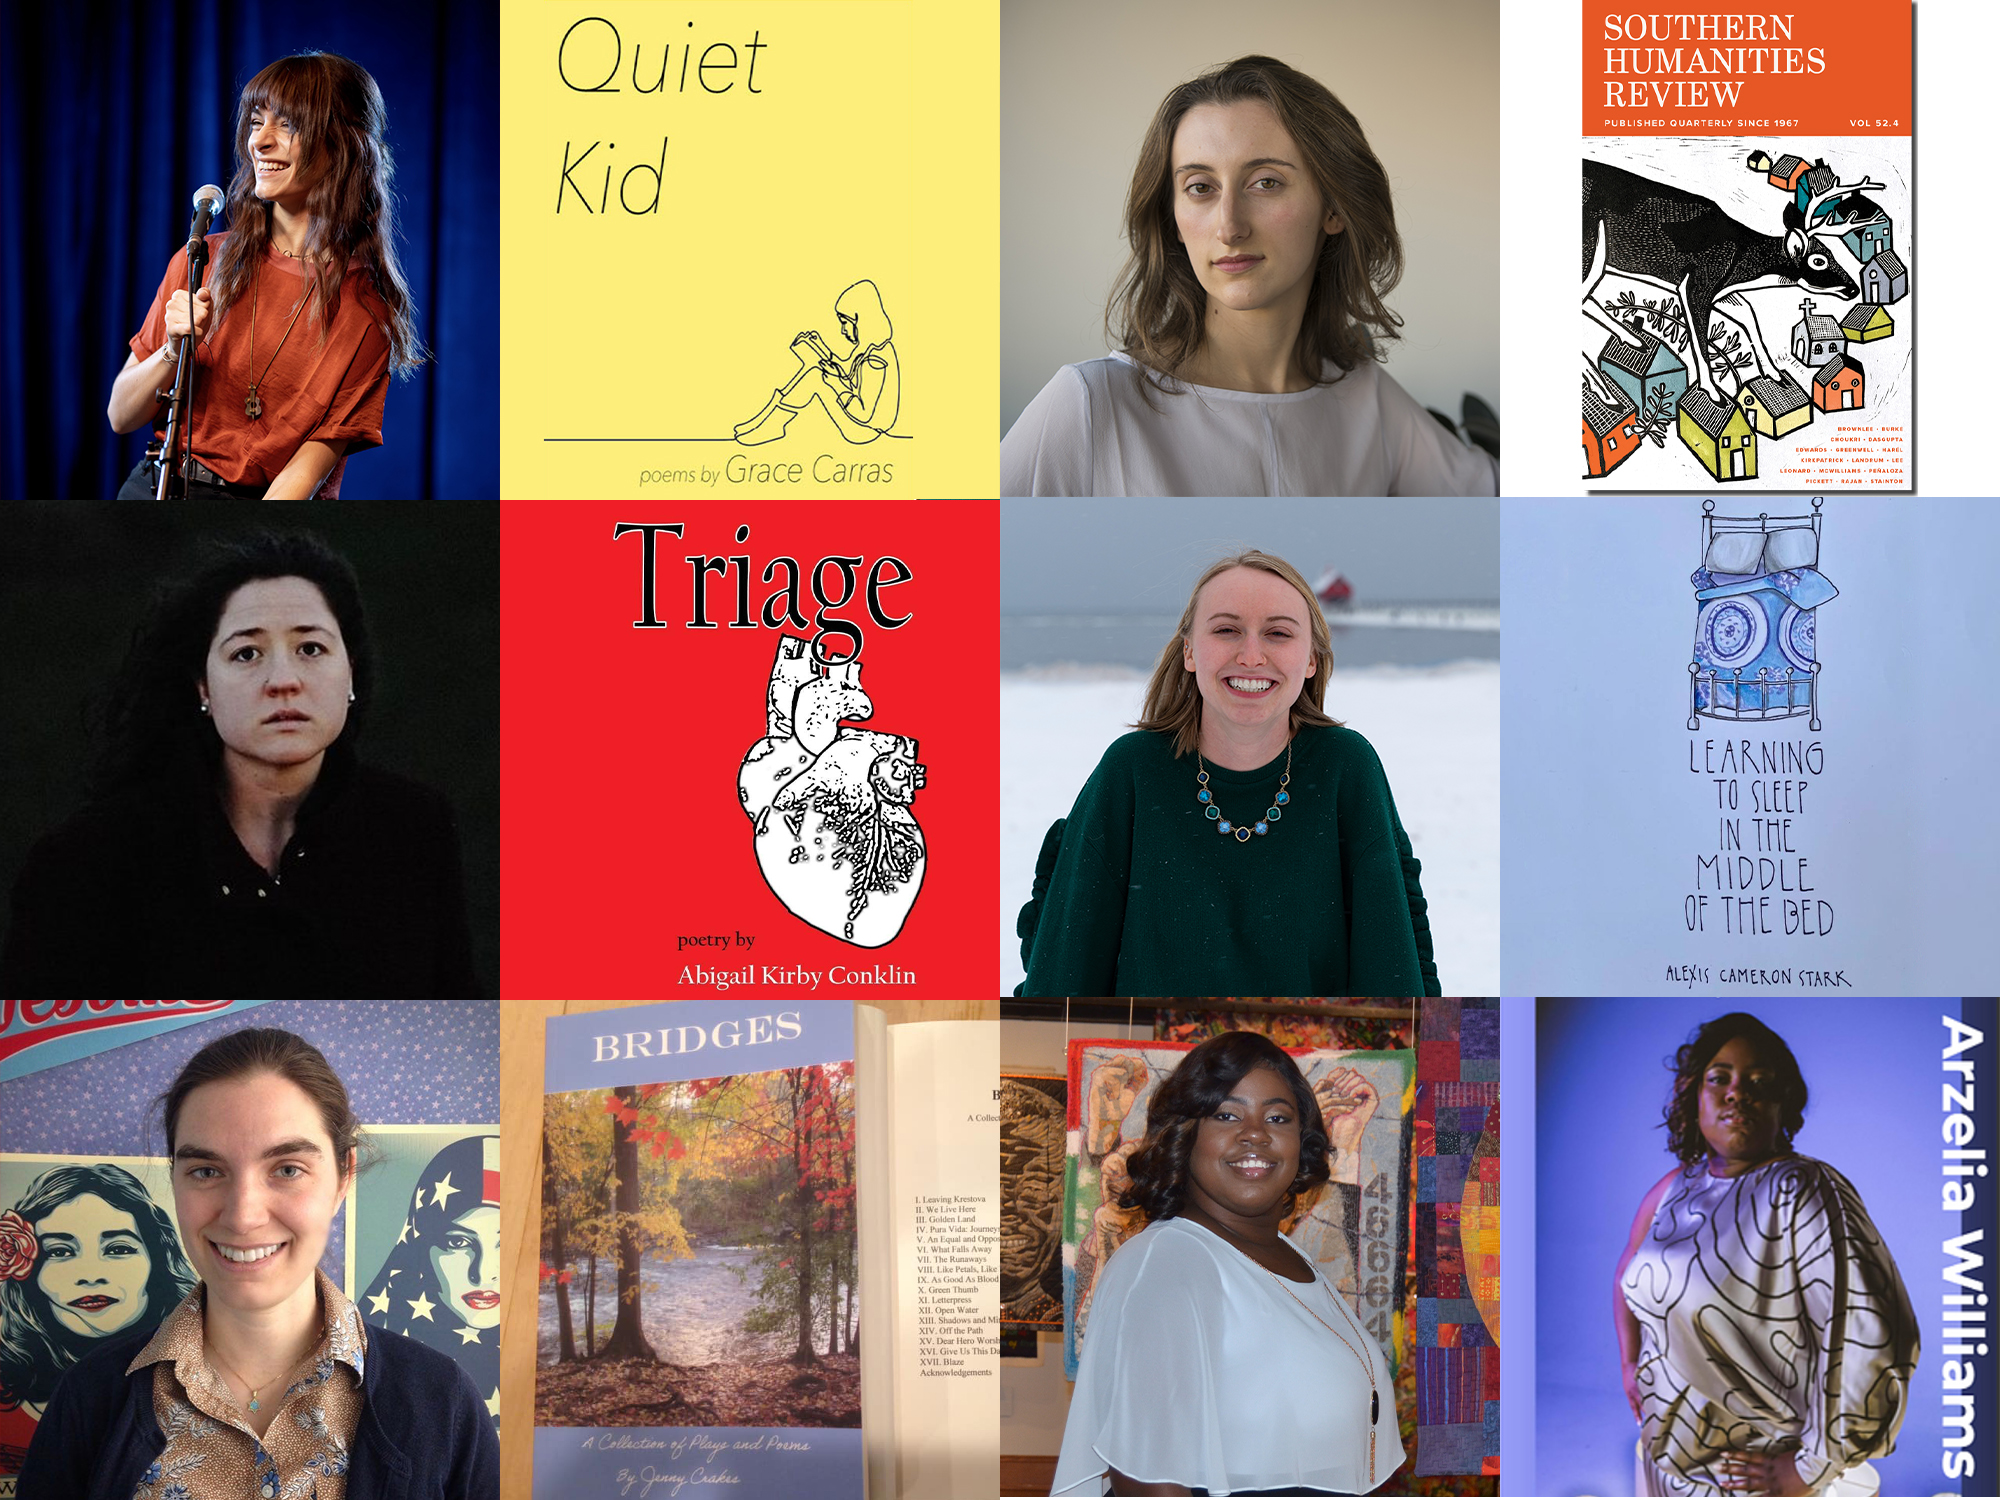 Image is a collage featured all the poets next to their published works.